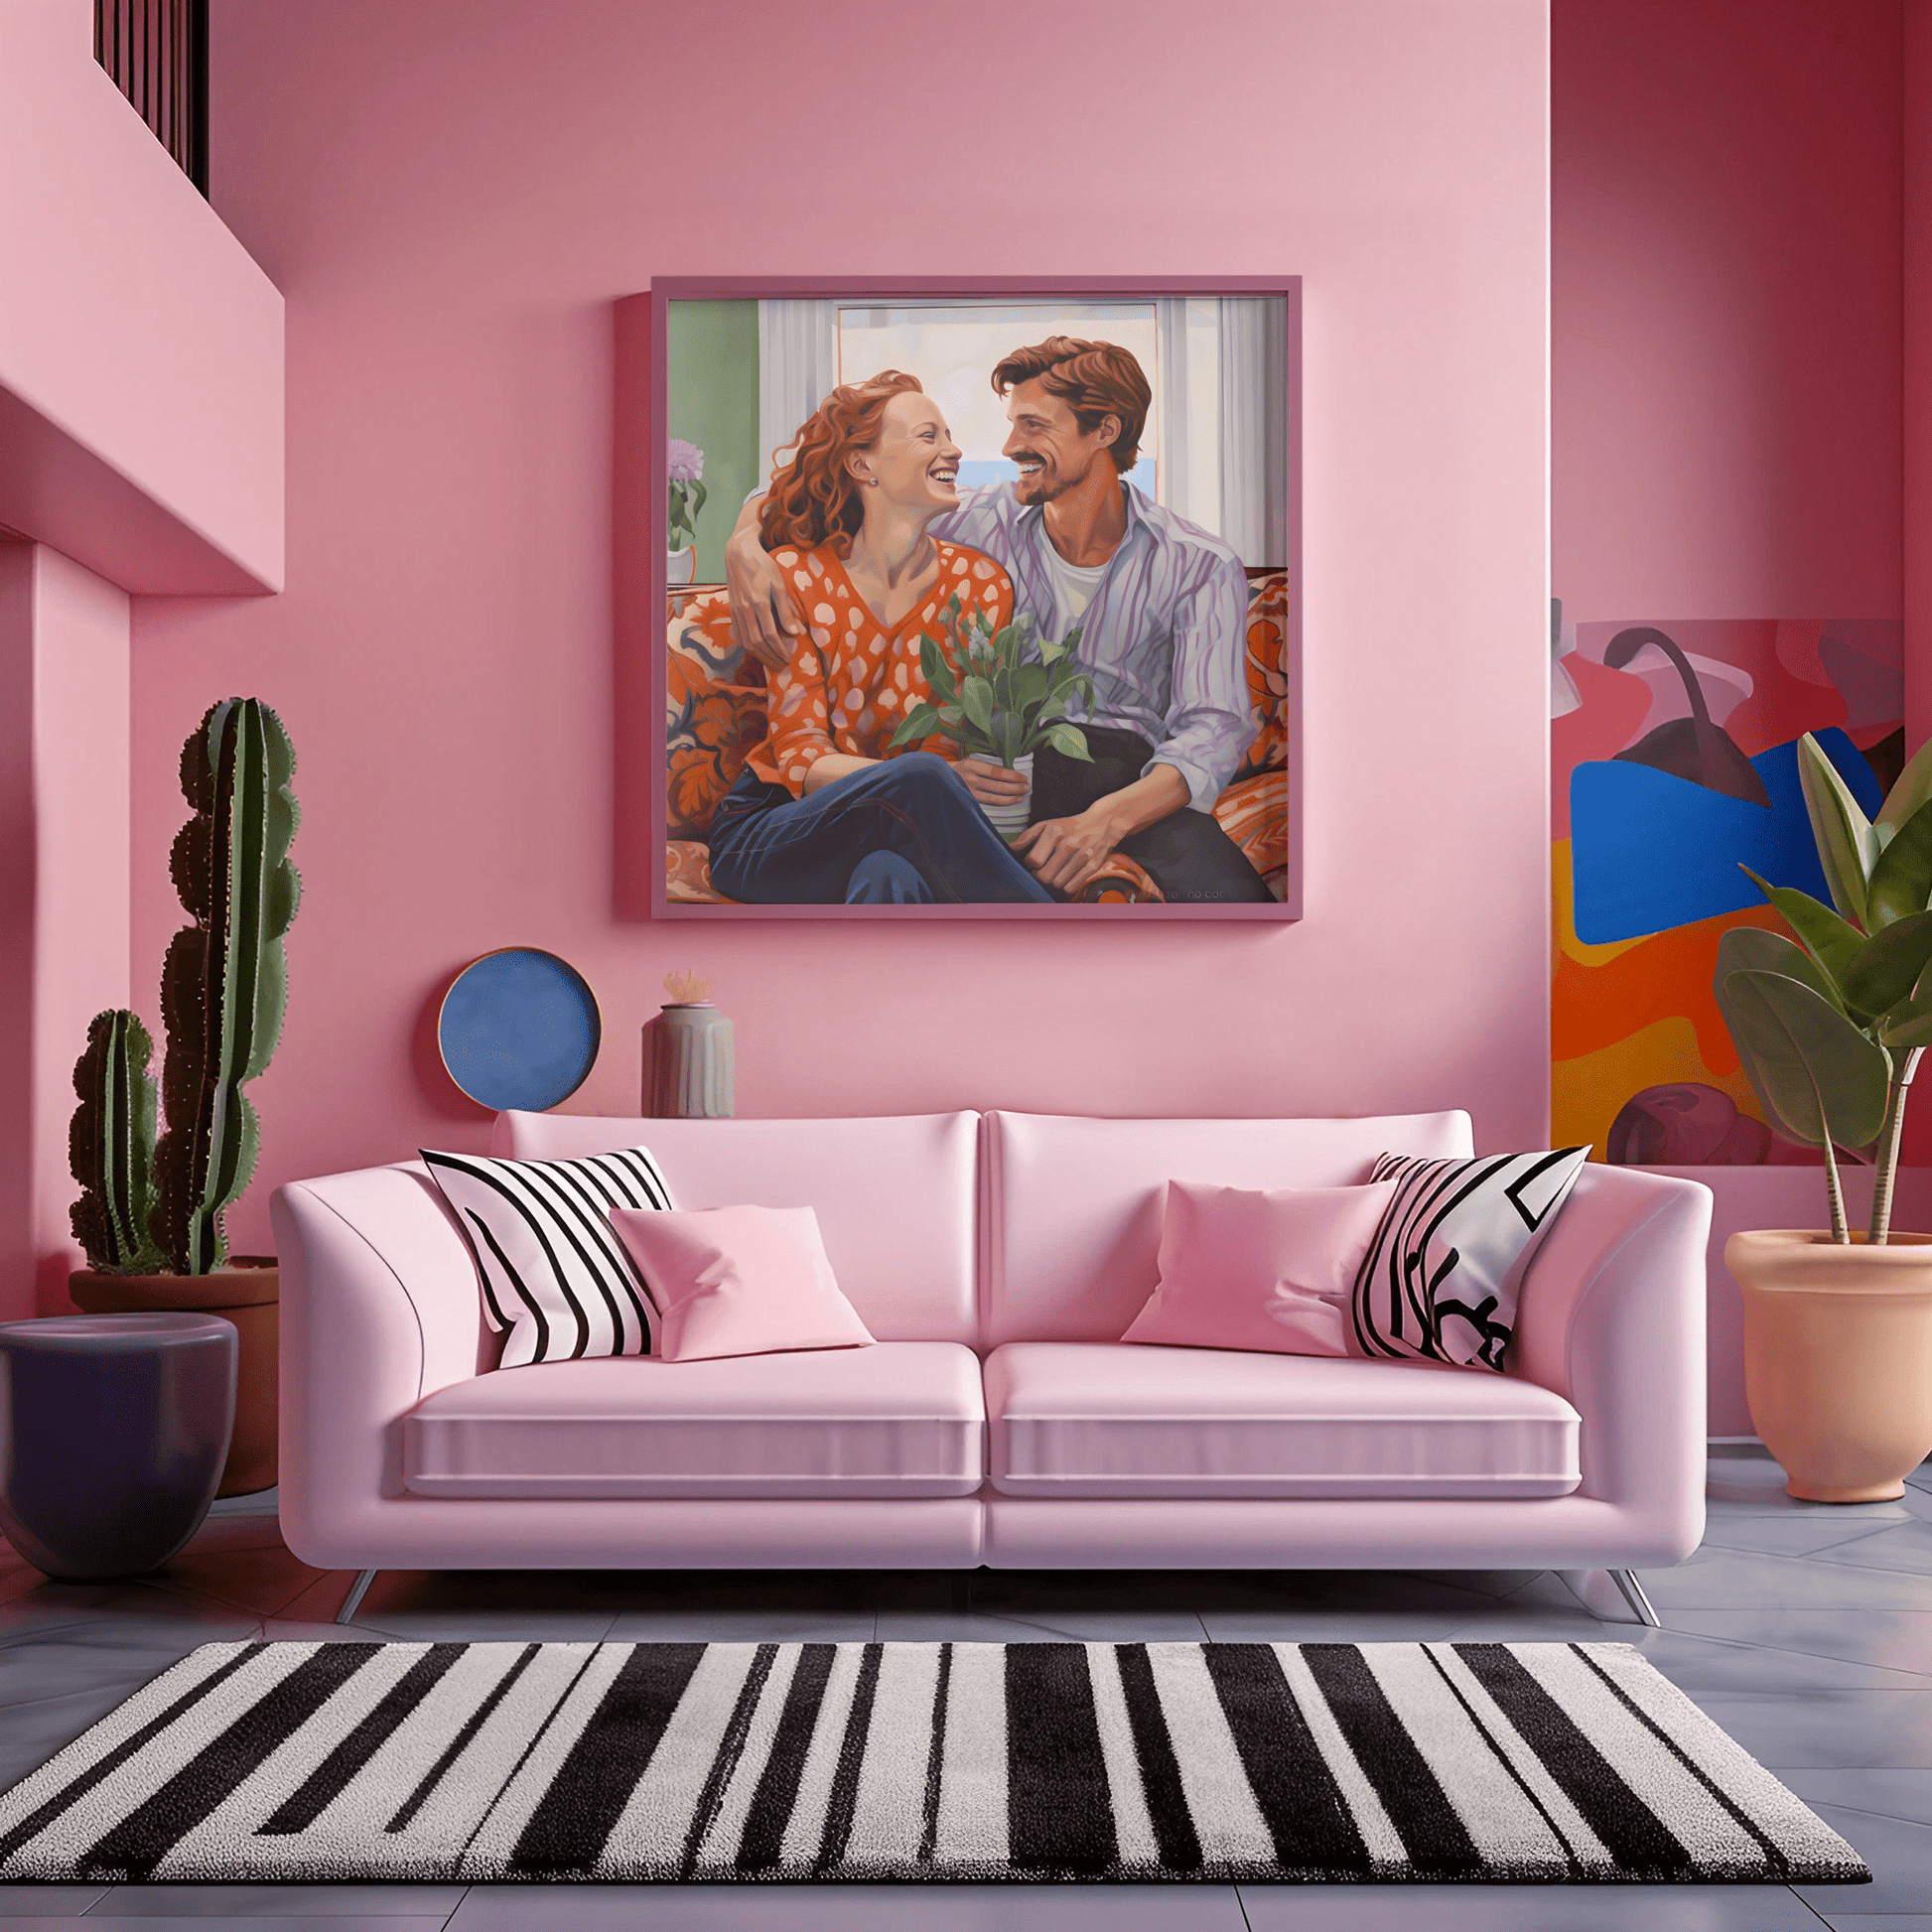 in situ pink sofa This captivating watercolor canvas showcases a young couple, deeply in love, sharing an intimate meal at a cozy restaurant. The soft, romantic hues highlight their comfort and contentment, creating a tender atmosphere. It's a heartfelt portrayal of romance.